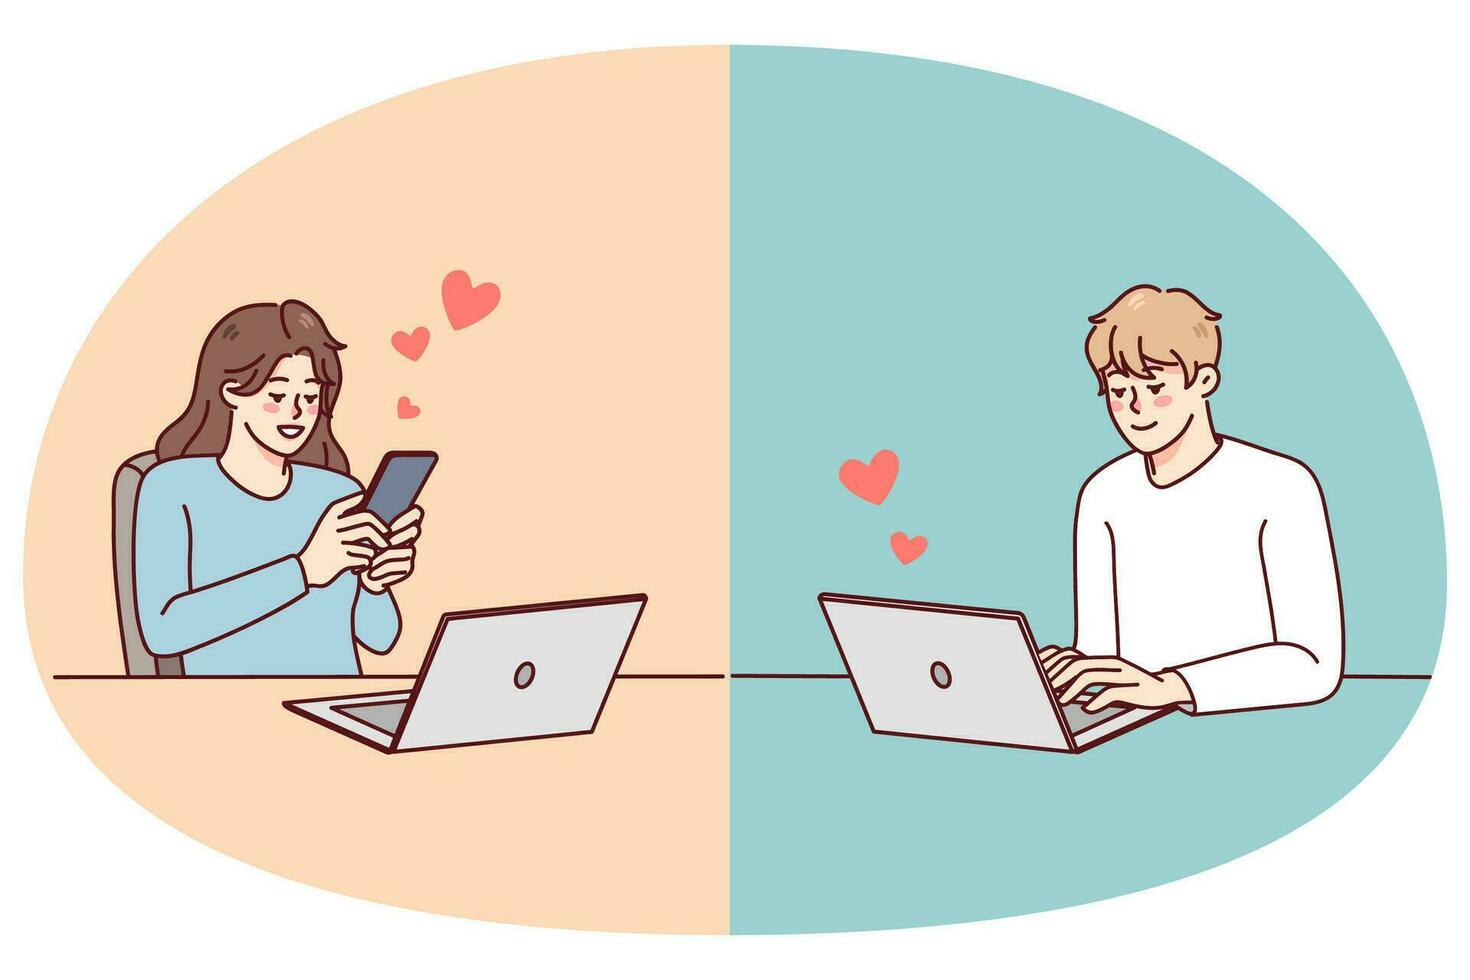 Couple texting online on gadget having relationship on distance. Man and woman message communicate on devices. Love and online dating concept. Vector illustration.